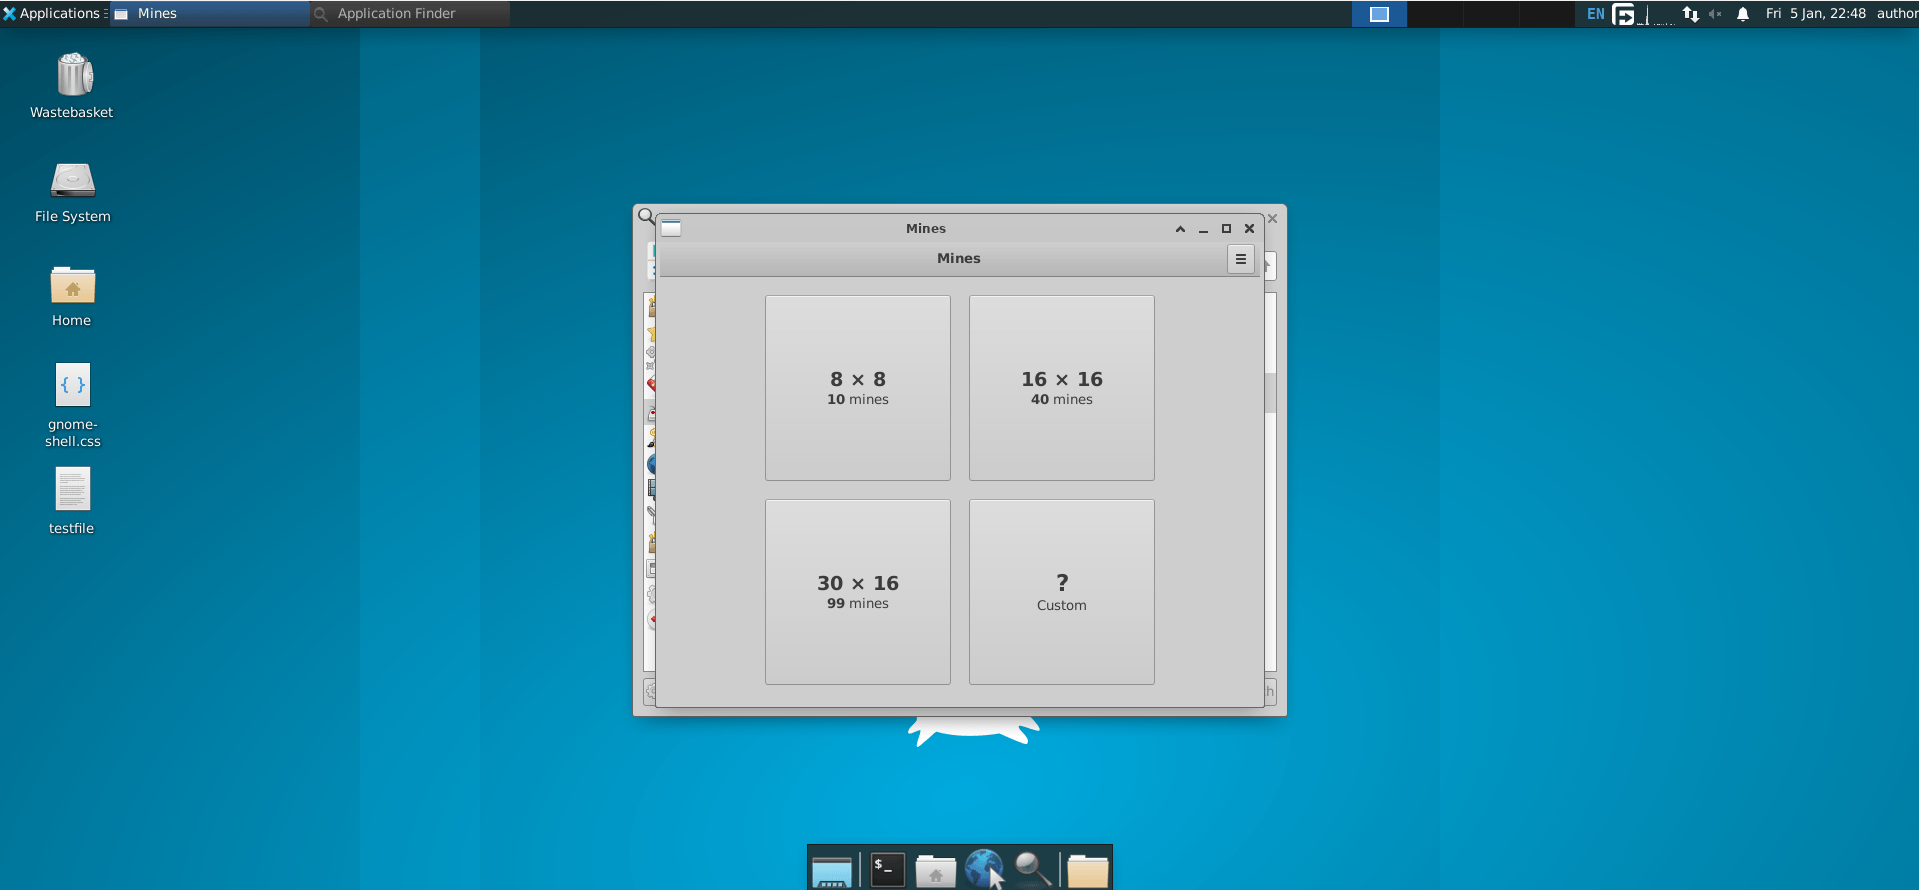 viewing mines application at the center of the screen in xfce